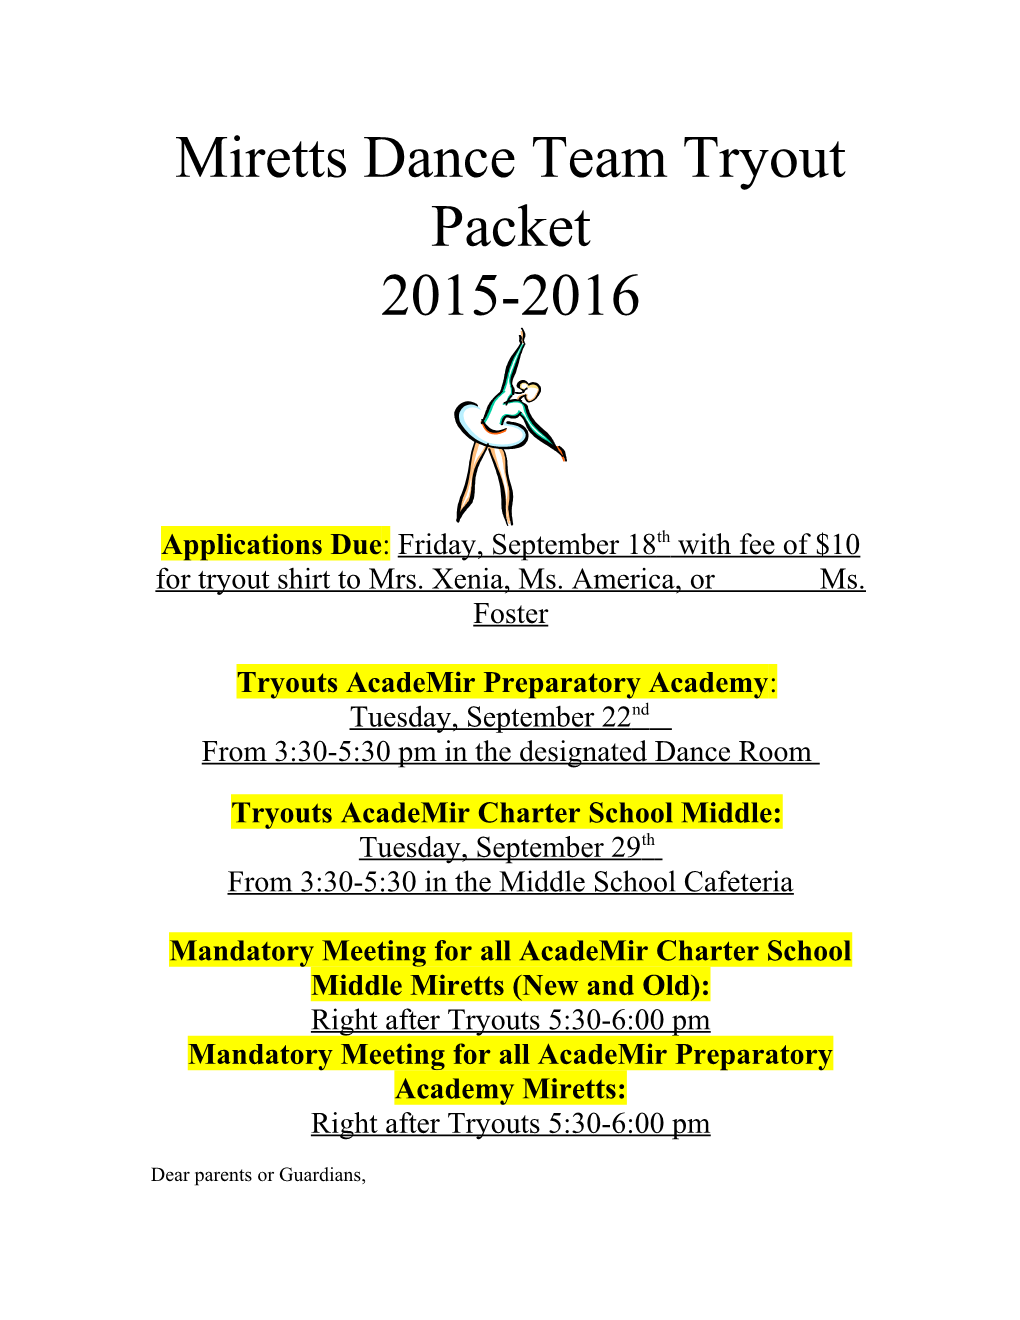 Miretts Dance Team Tryout Packet